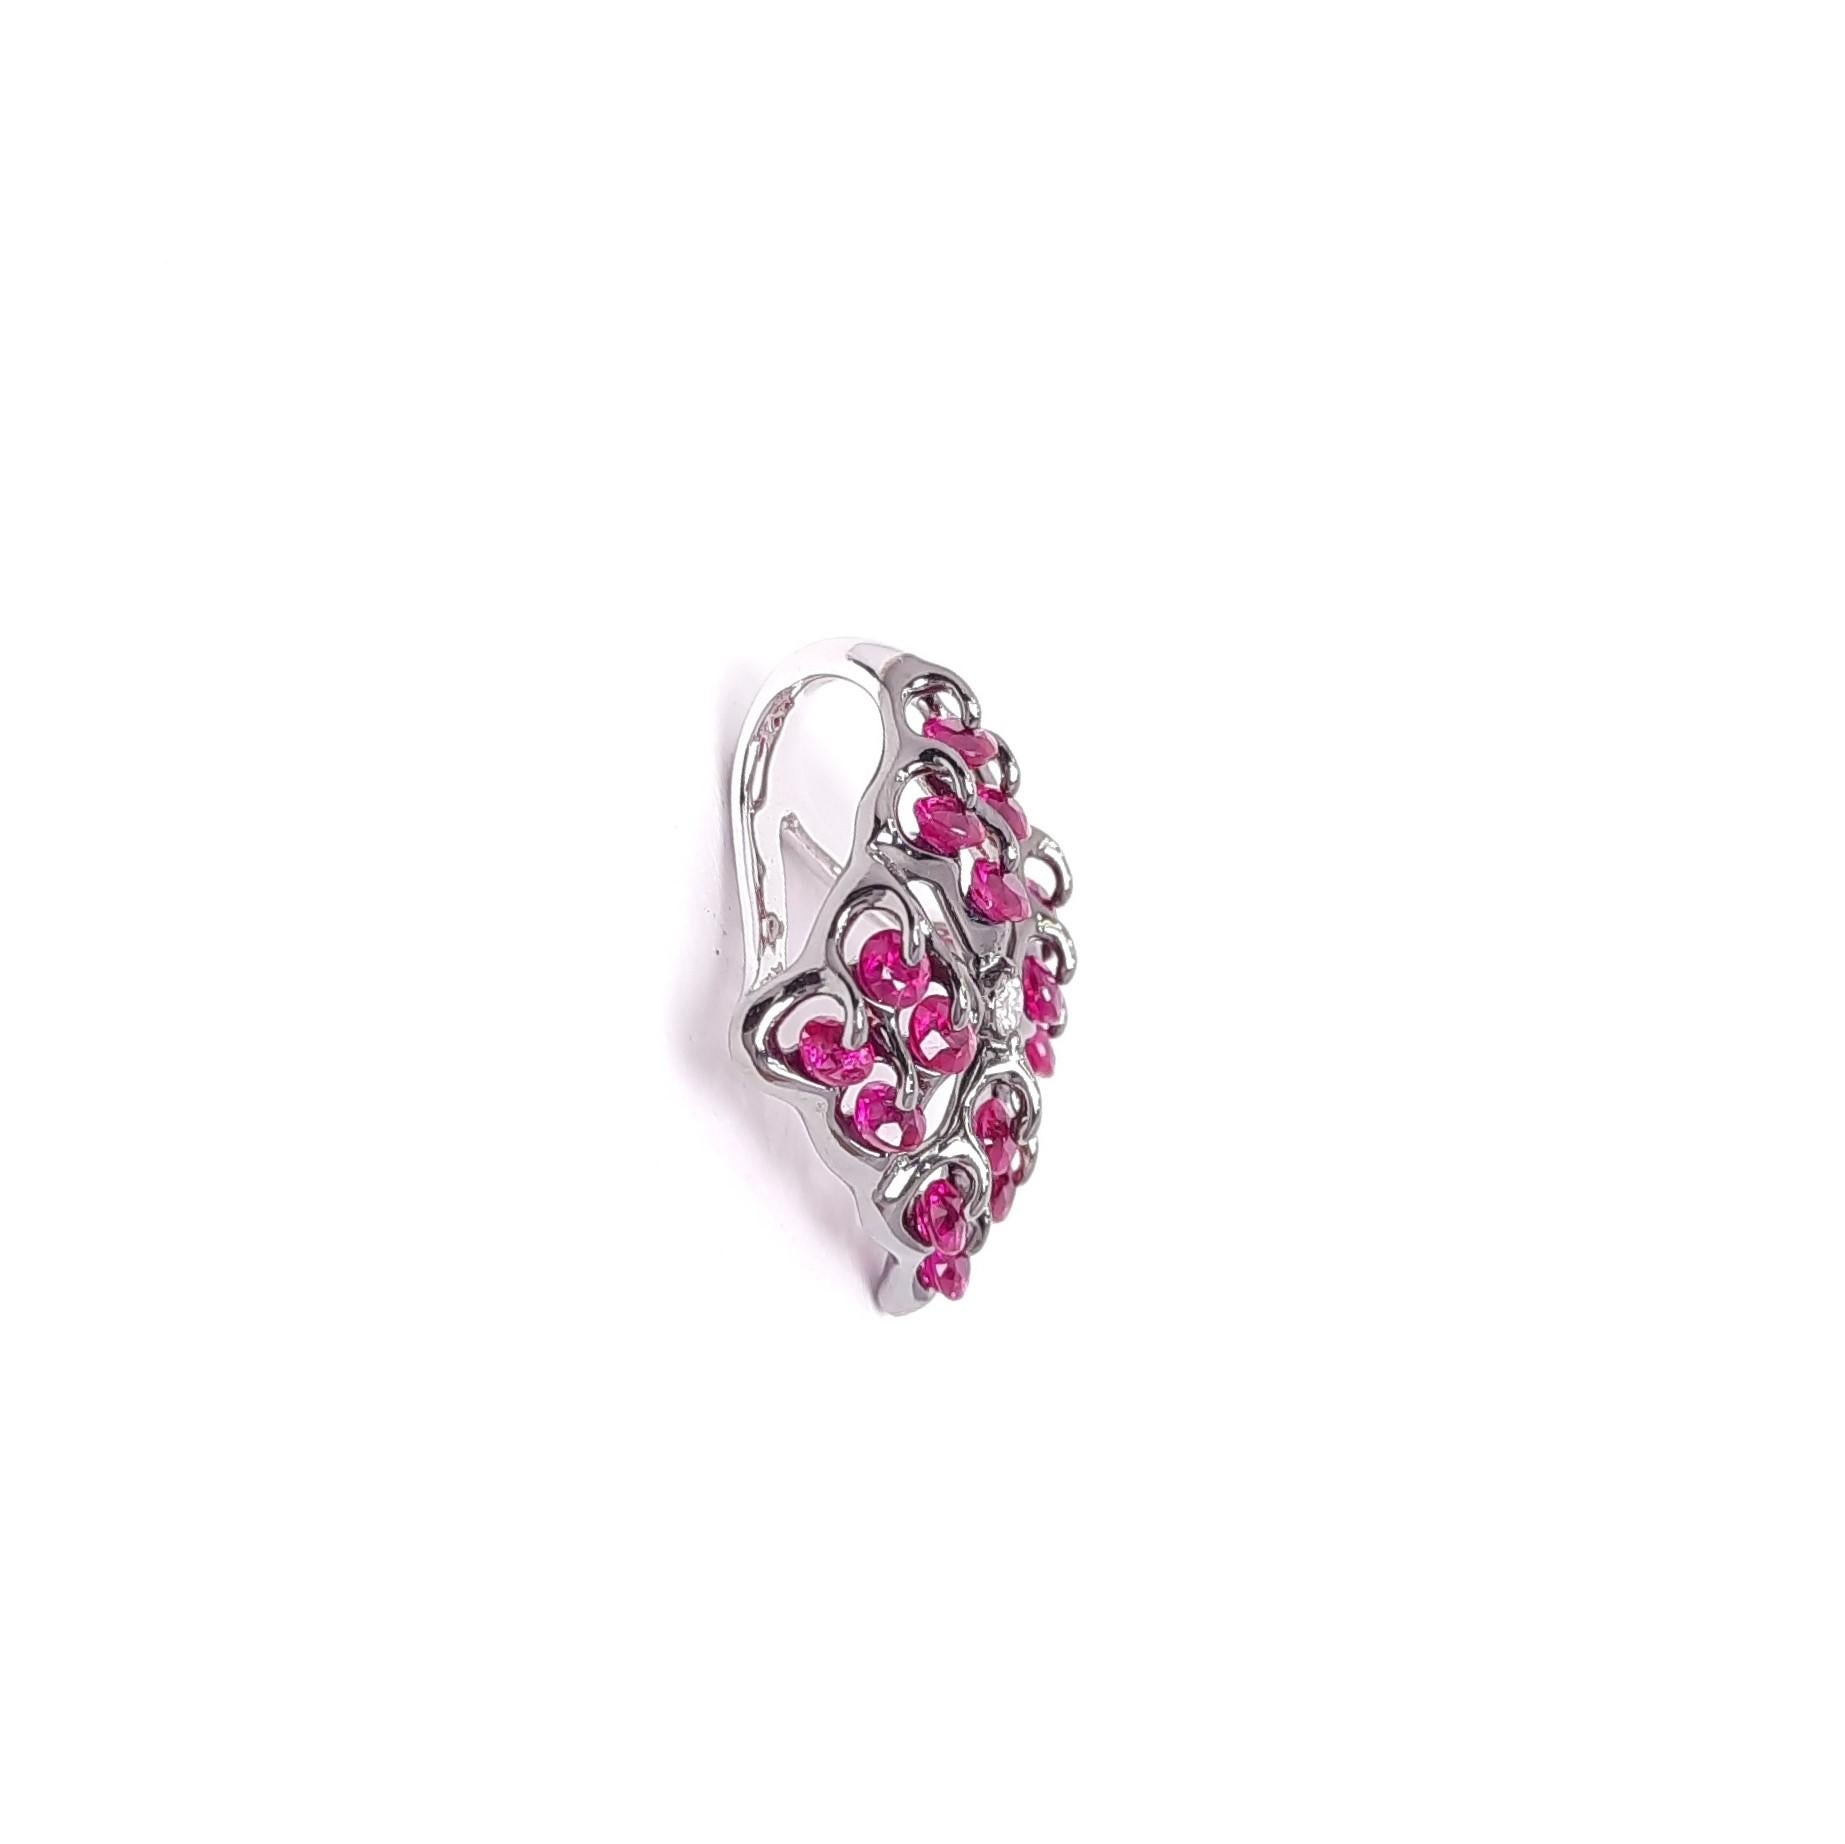 Contemporary Moiseikin 18 Karat White Gold Ruby Pendant with a Gift Chain